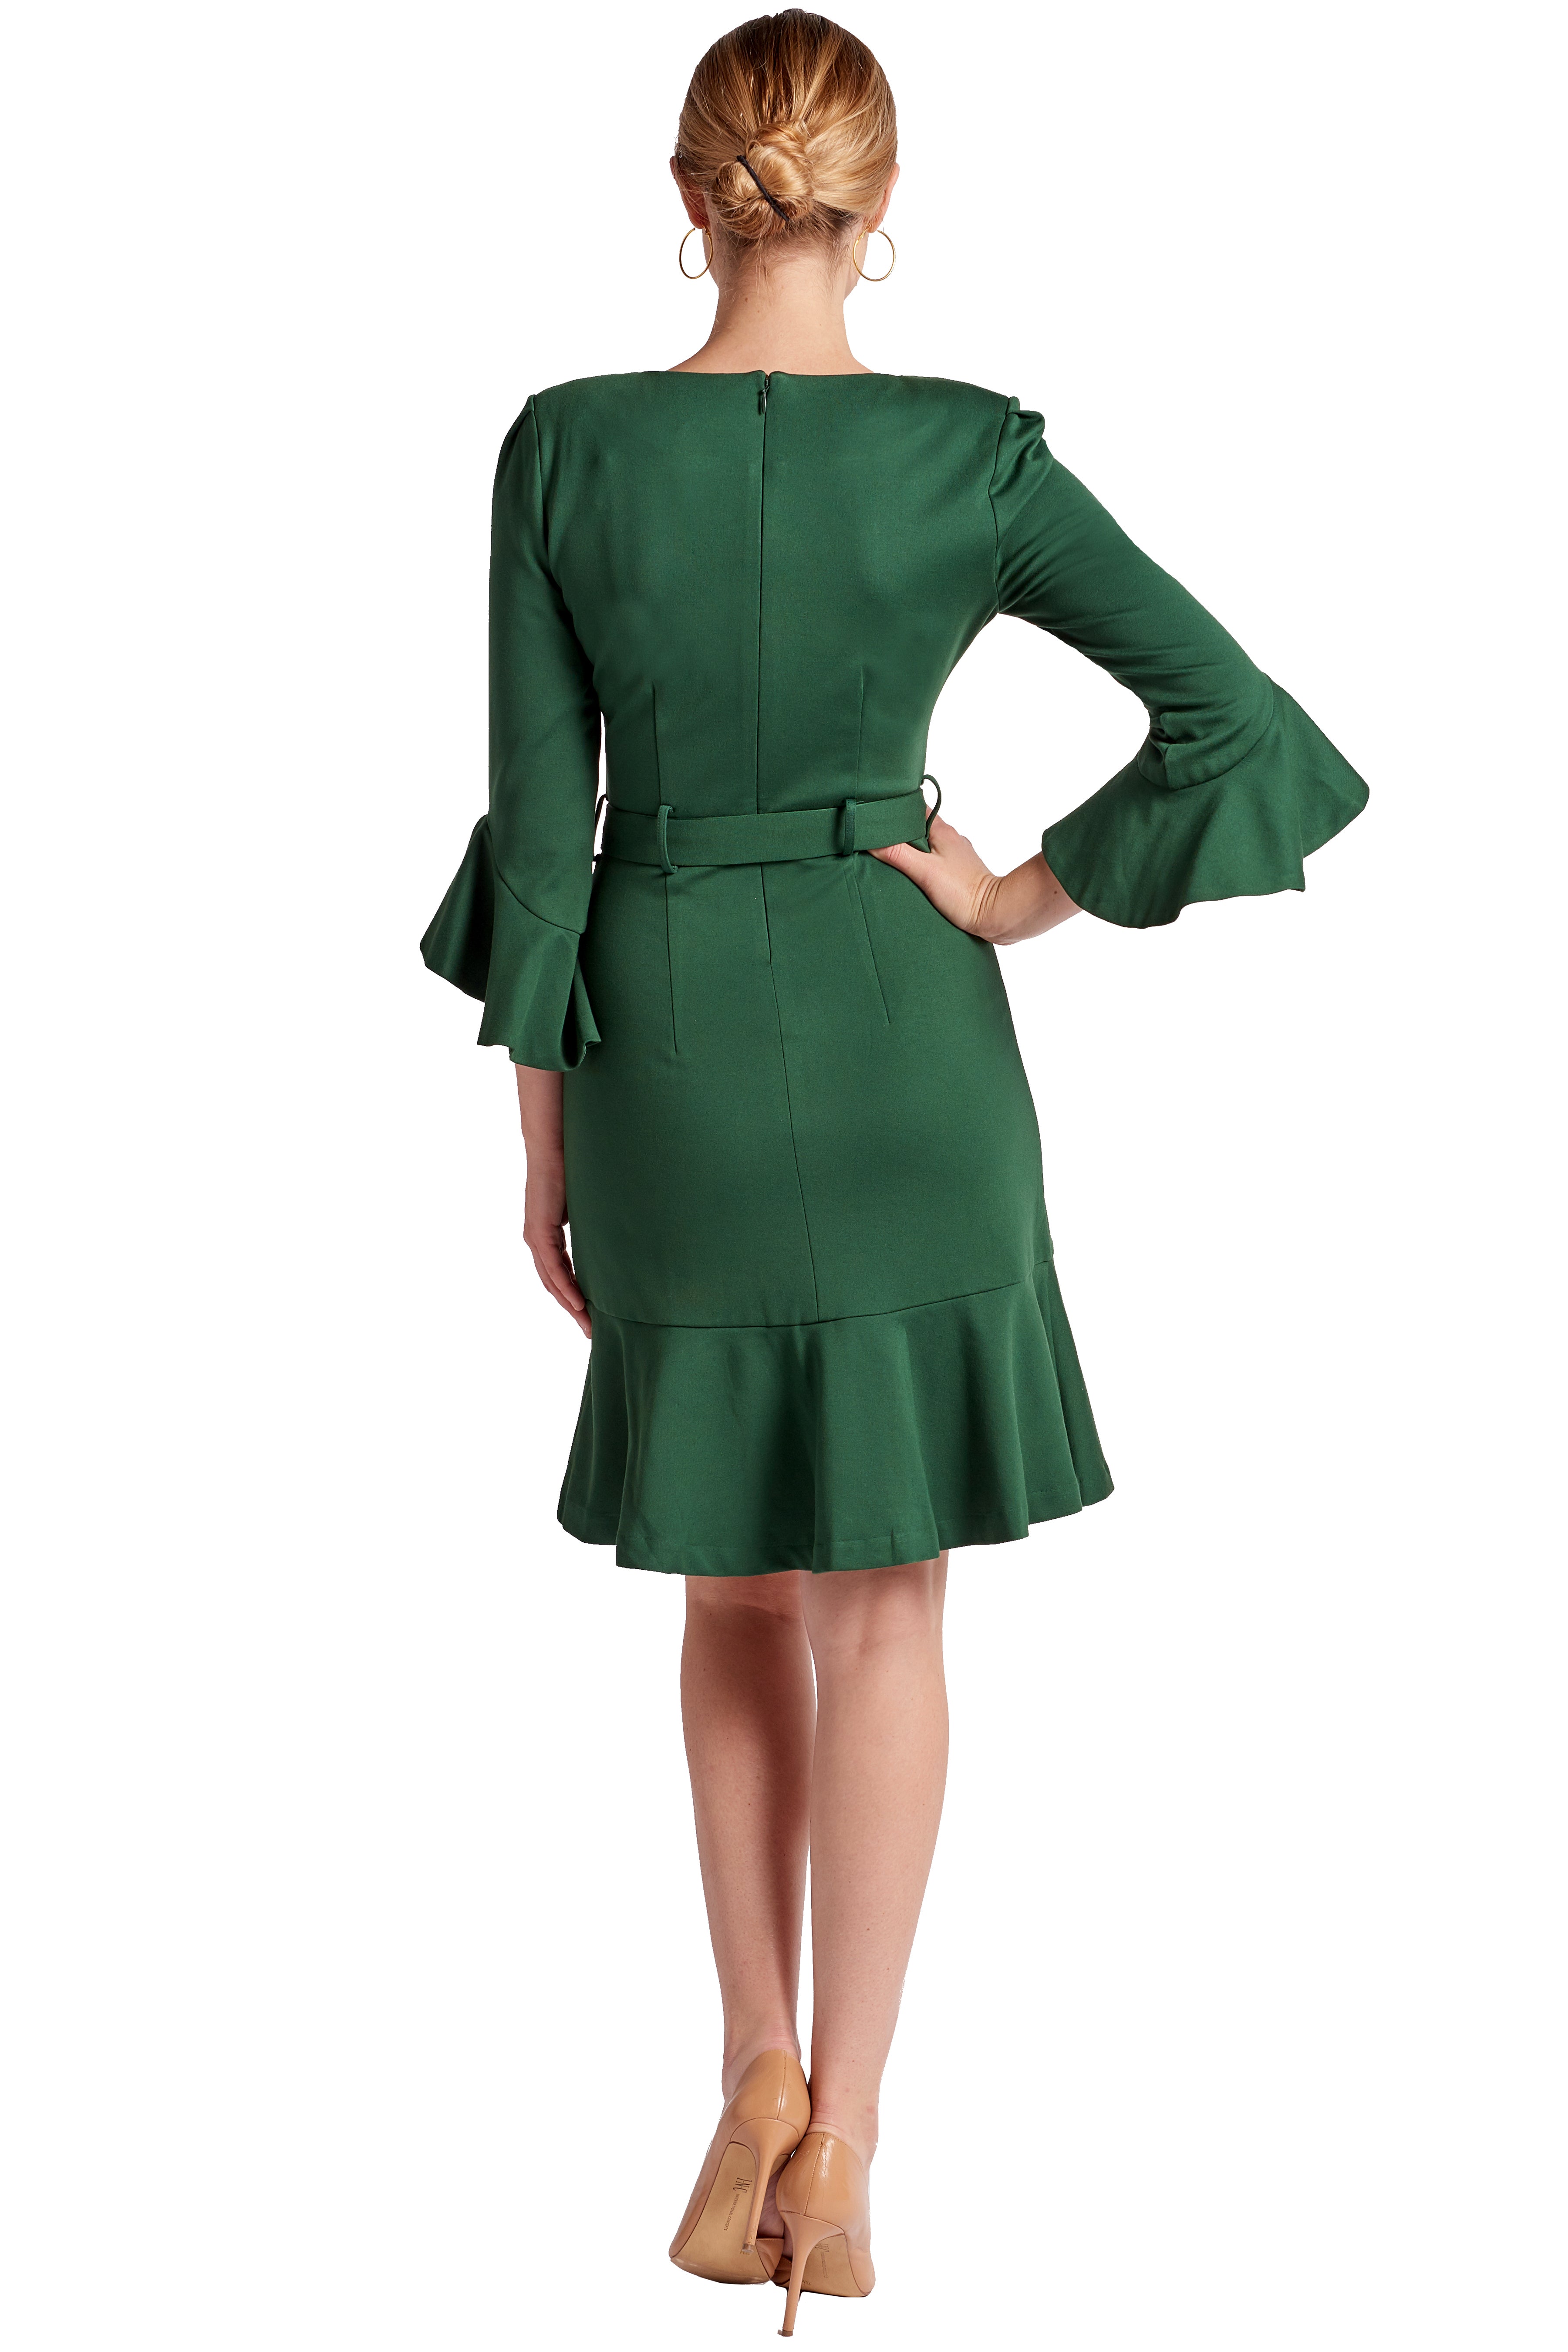 Back view of model wearing the Simona Maghen Tayte Dress in forest green, knee length, v-neck knit Ponte dress with 3/4 bell sleeves, ruffle hem and self belt.